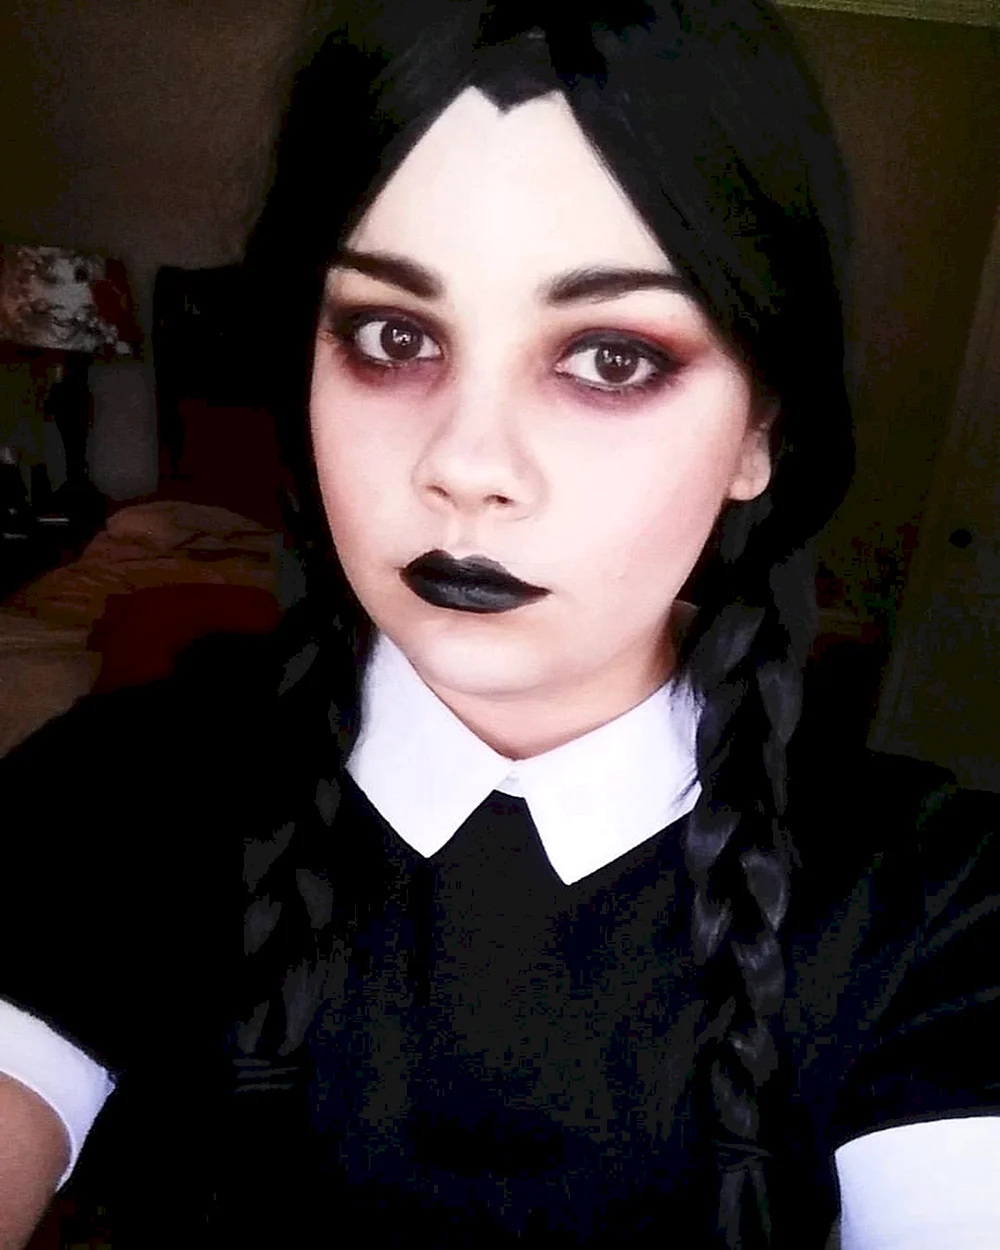 Scary Wednesday Addams Cosplay